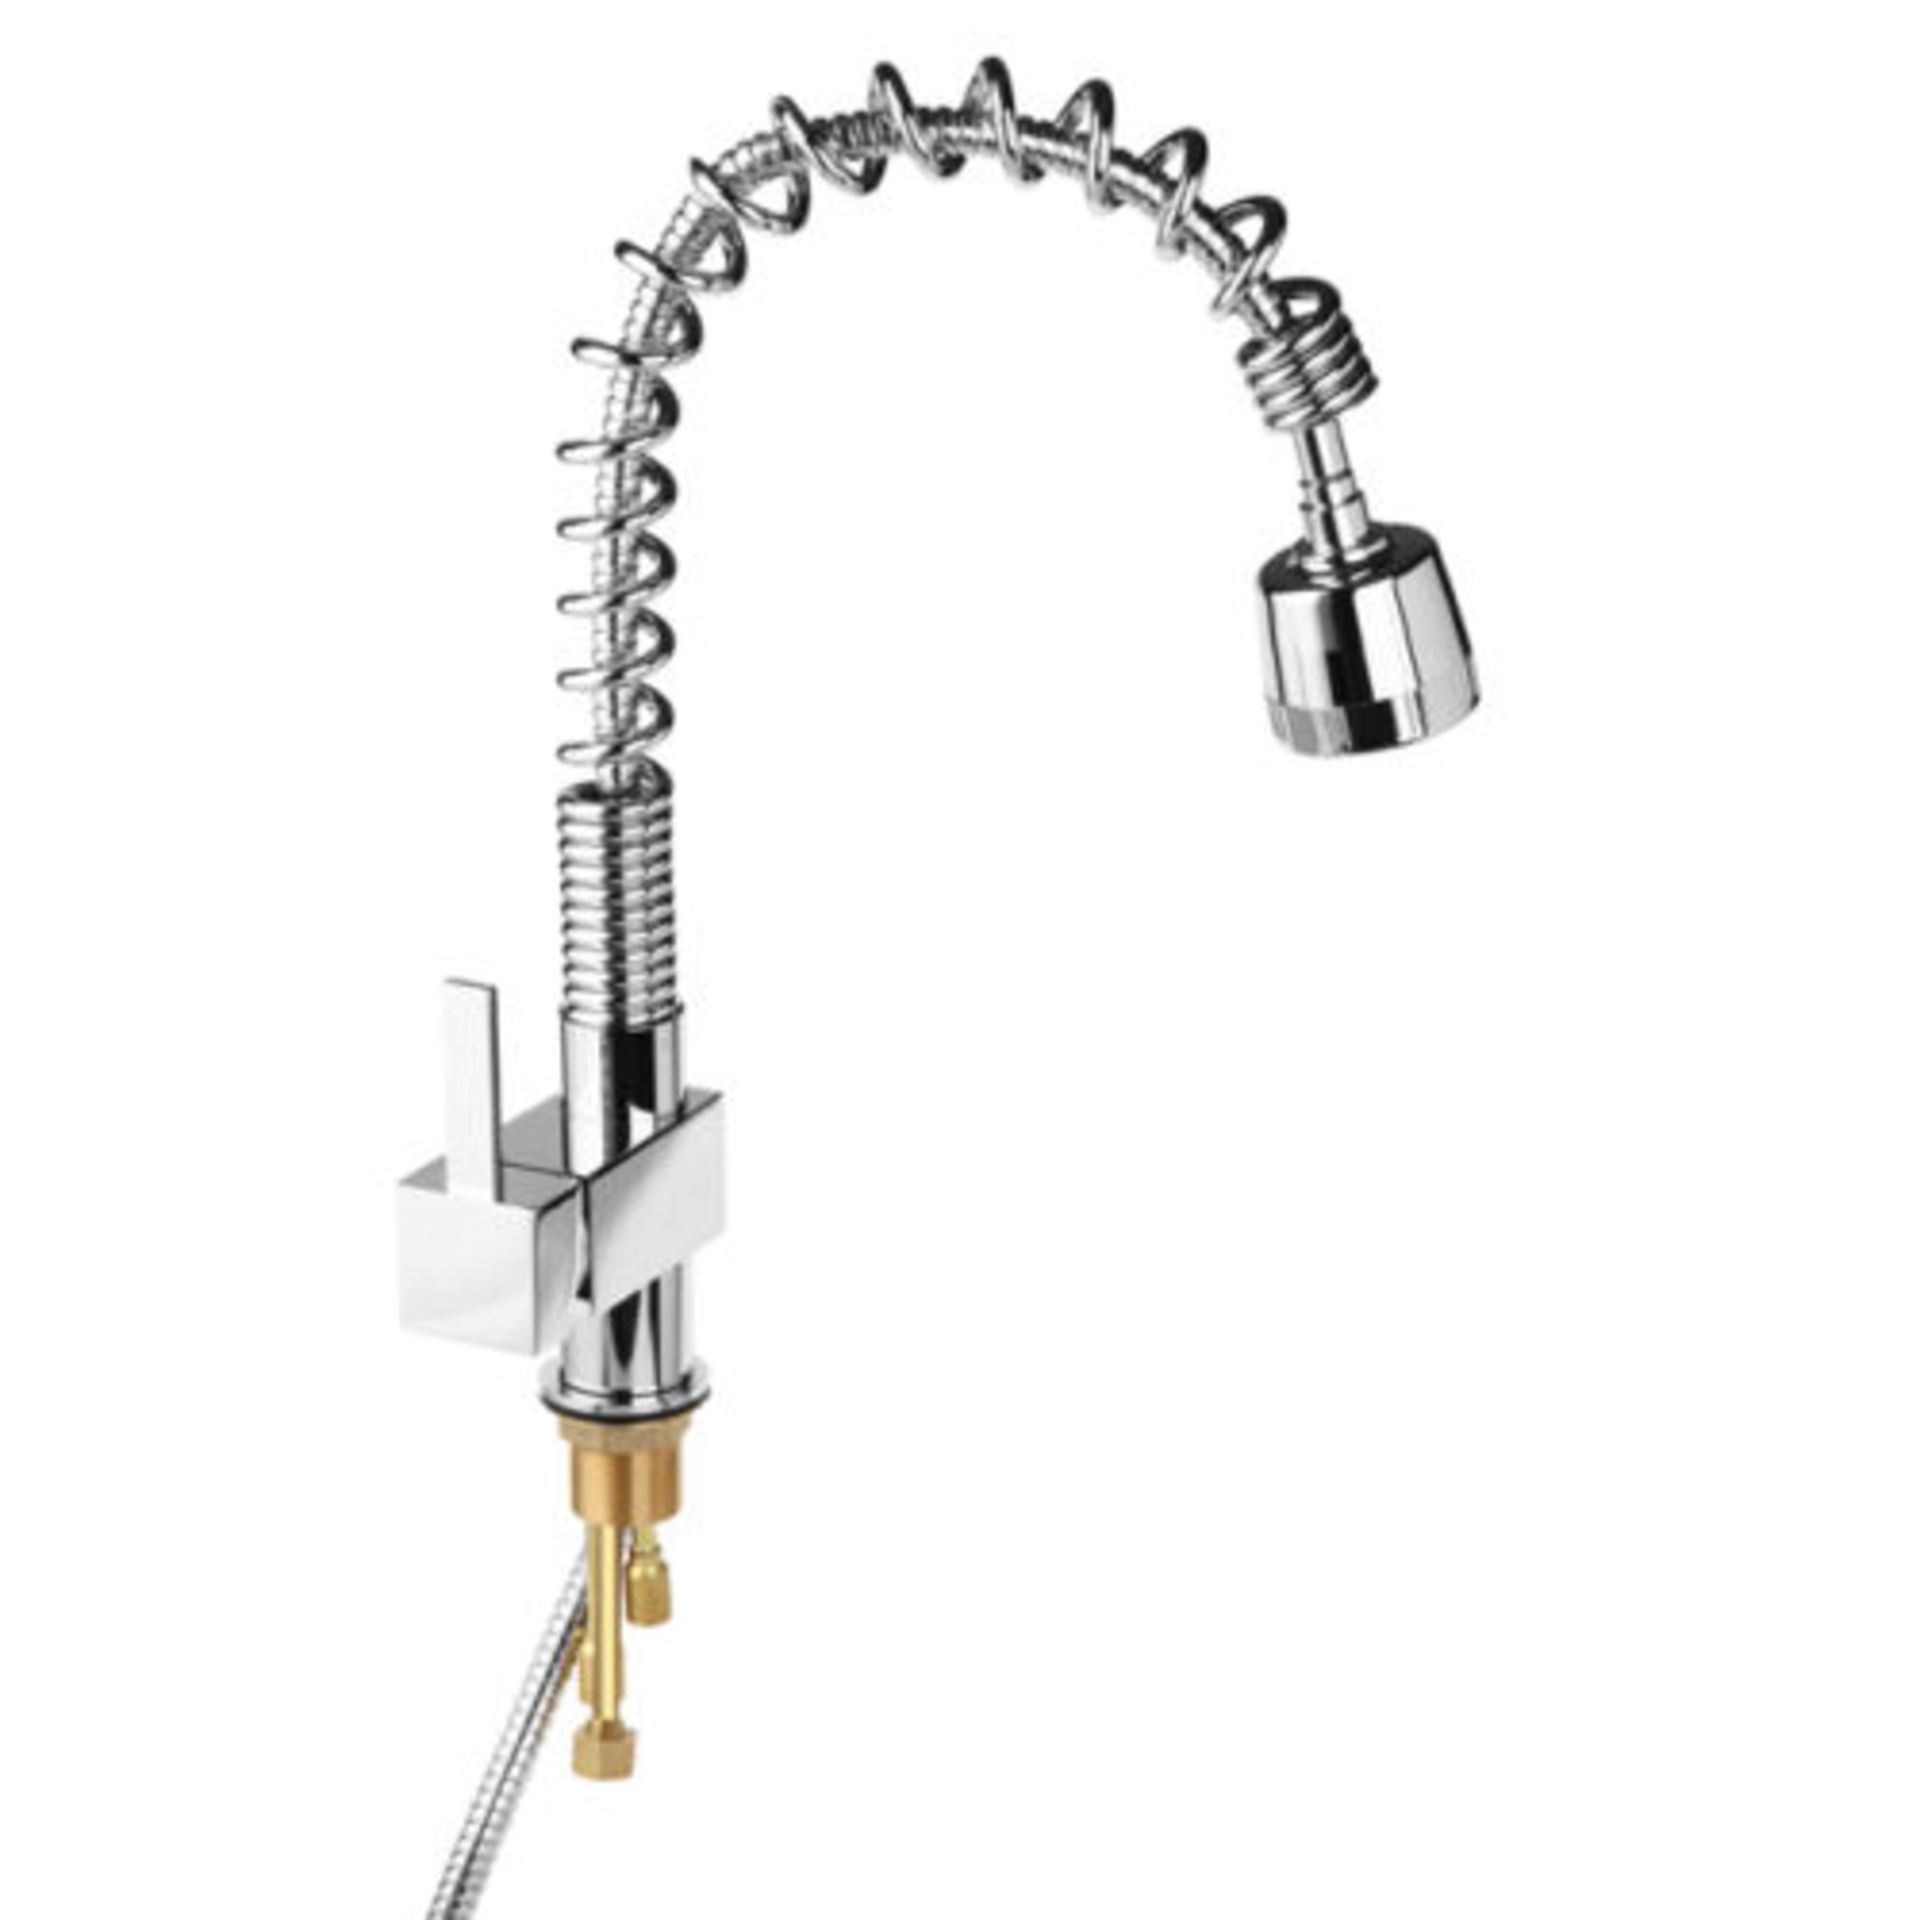 (PA234) Maddie Brushed Chrome Monobloc Kitchen Tap Swivel Pull Out Spray Mixer. RRP £219.99. - Image 2 of 2